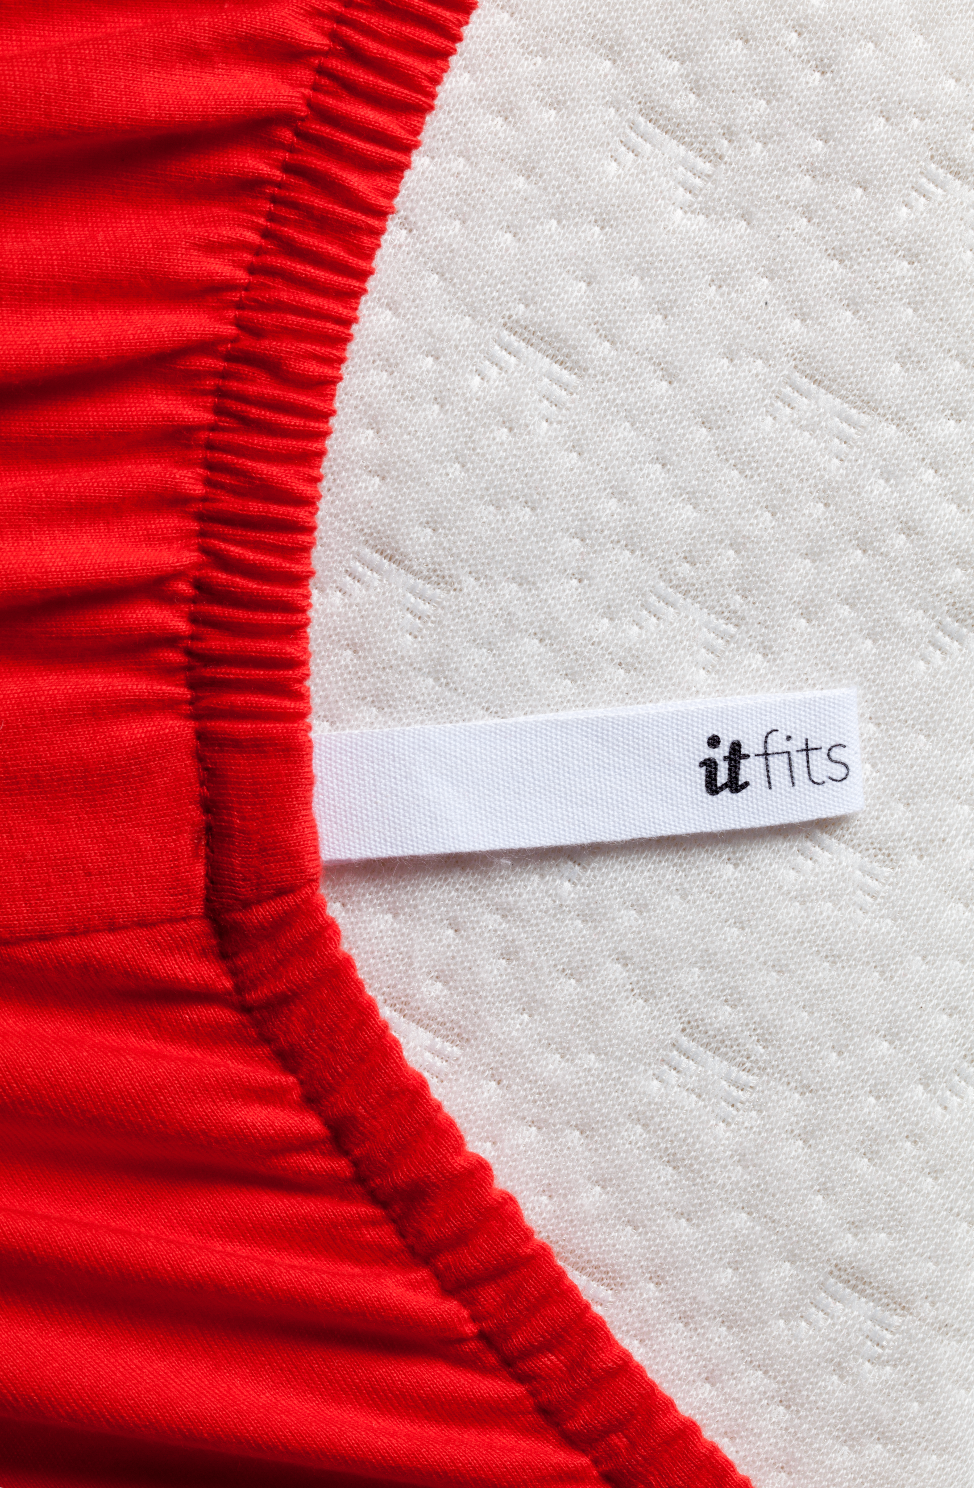 Fitted Sheet | Itfits: A Fitted Sheet Is In High-Quality Cotton